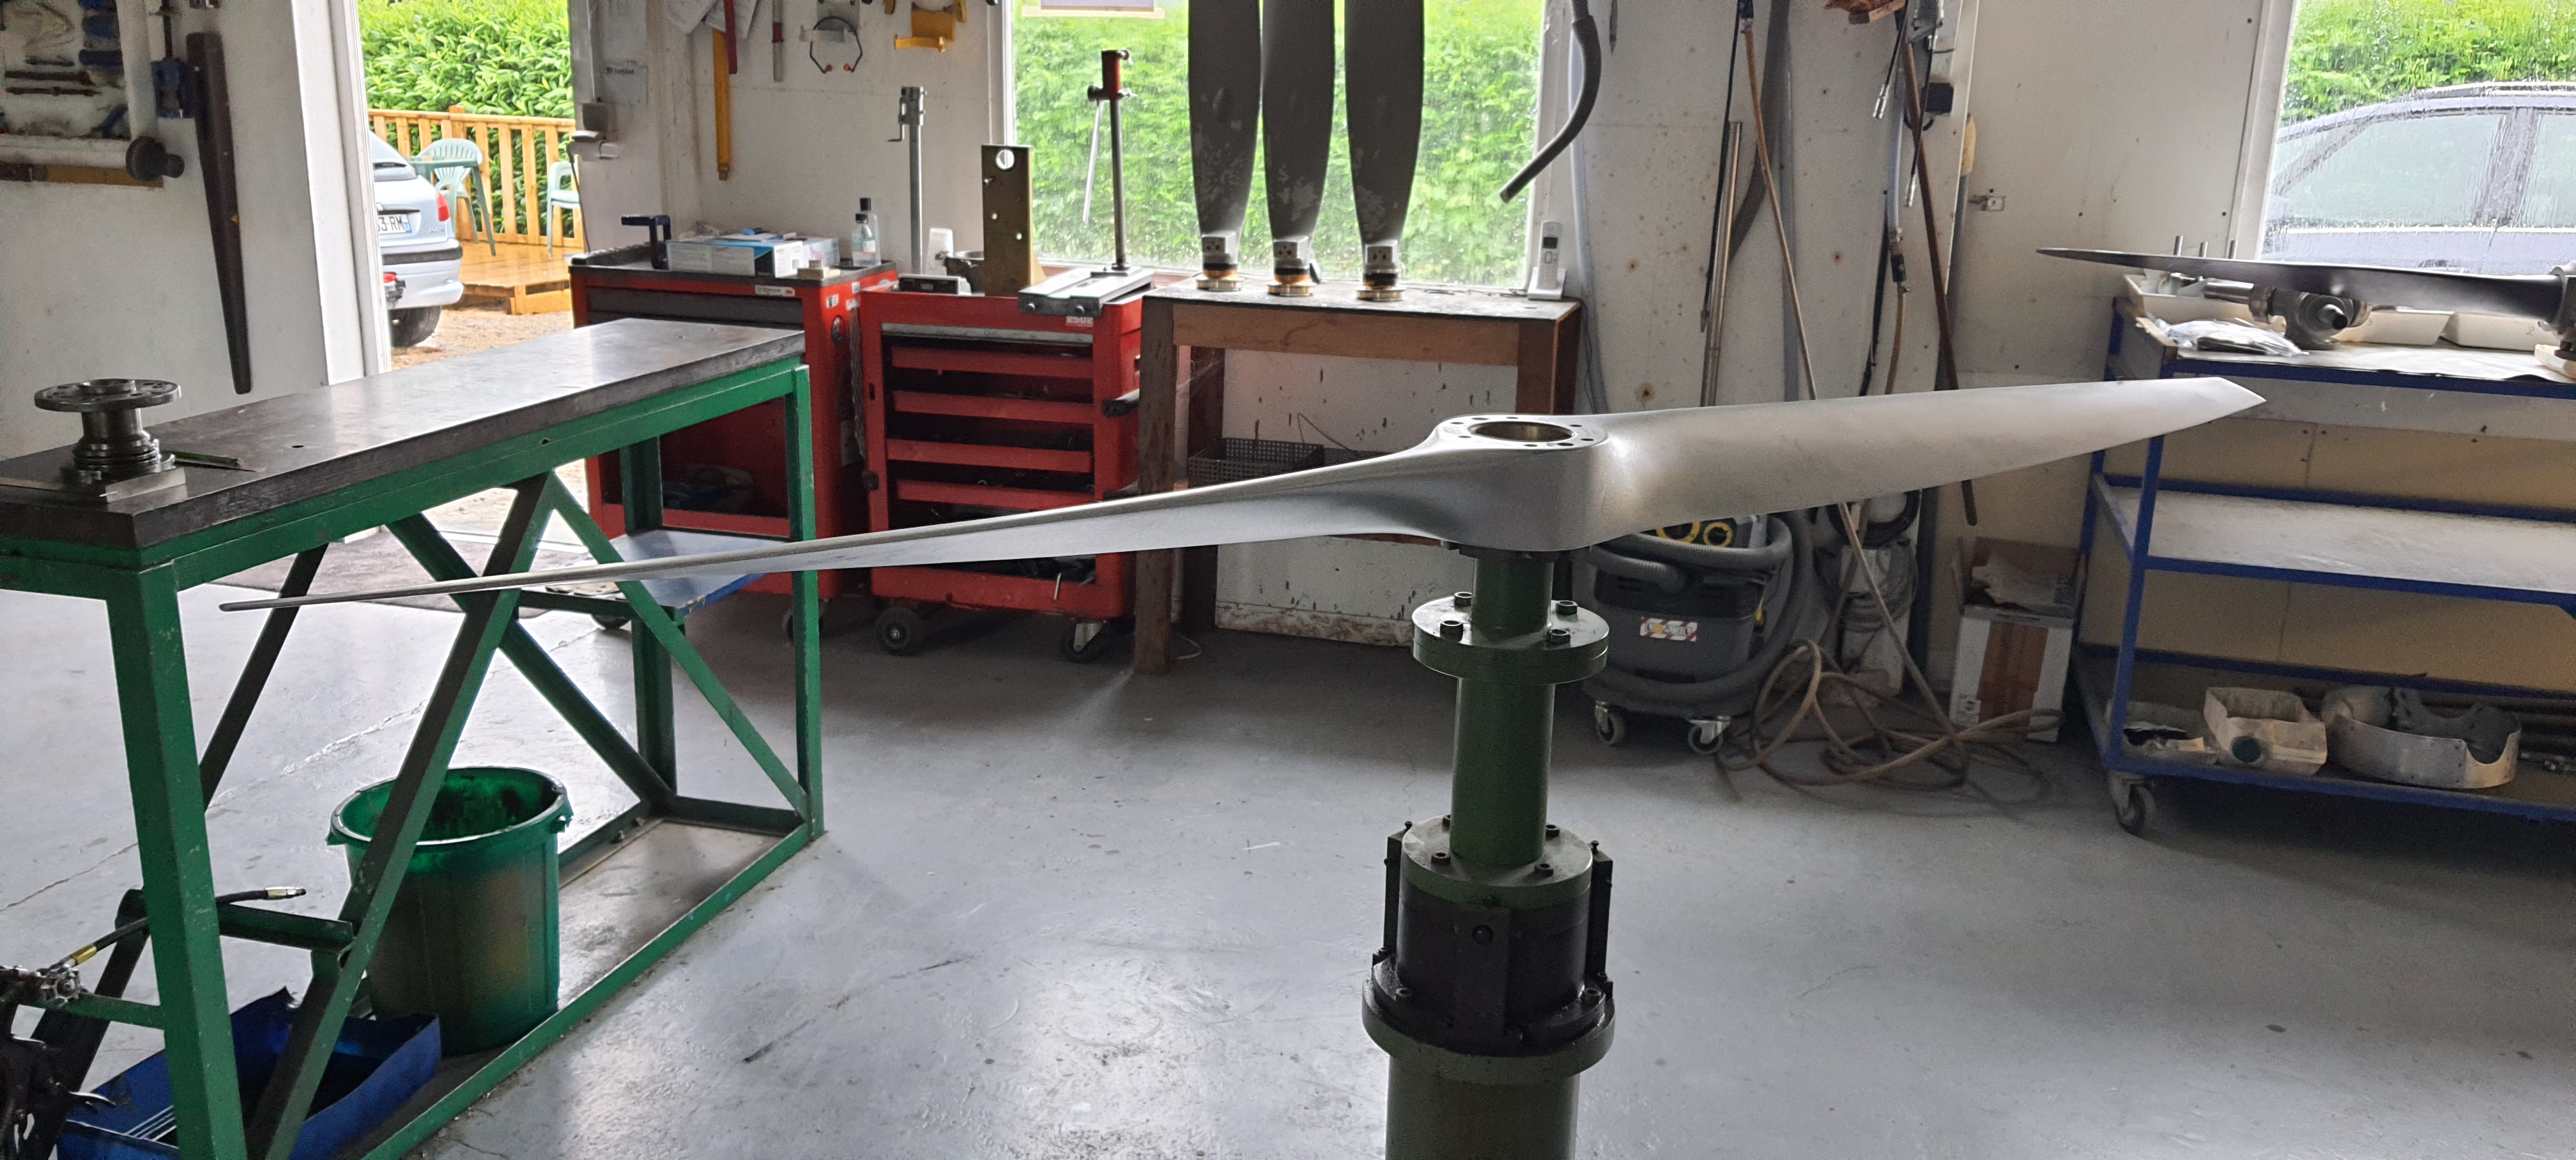 Two-blade propeller on the static balance machine - Airservices France